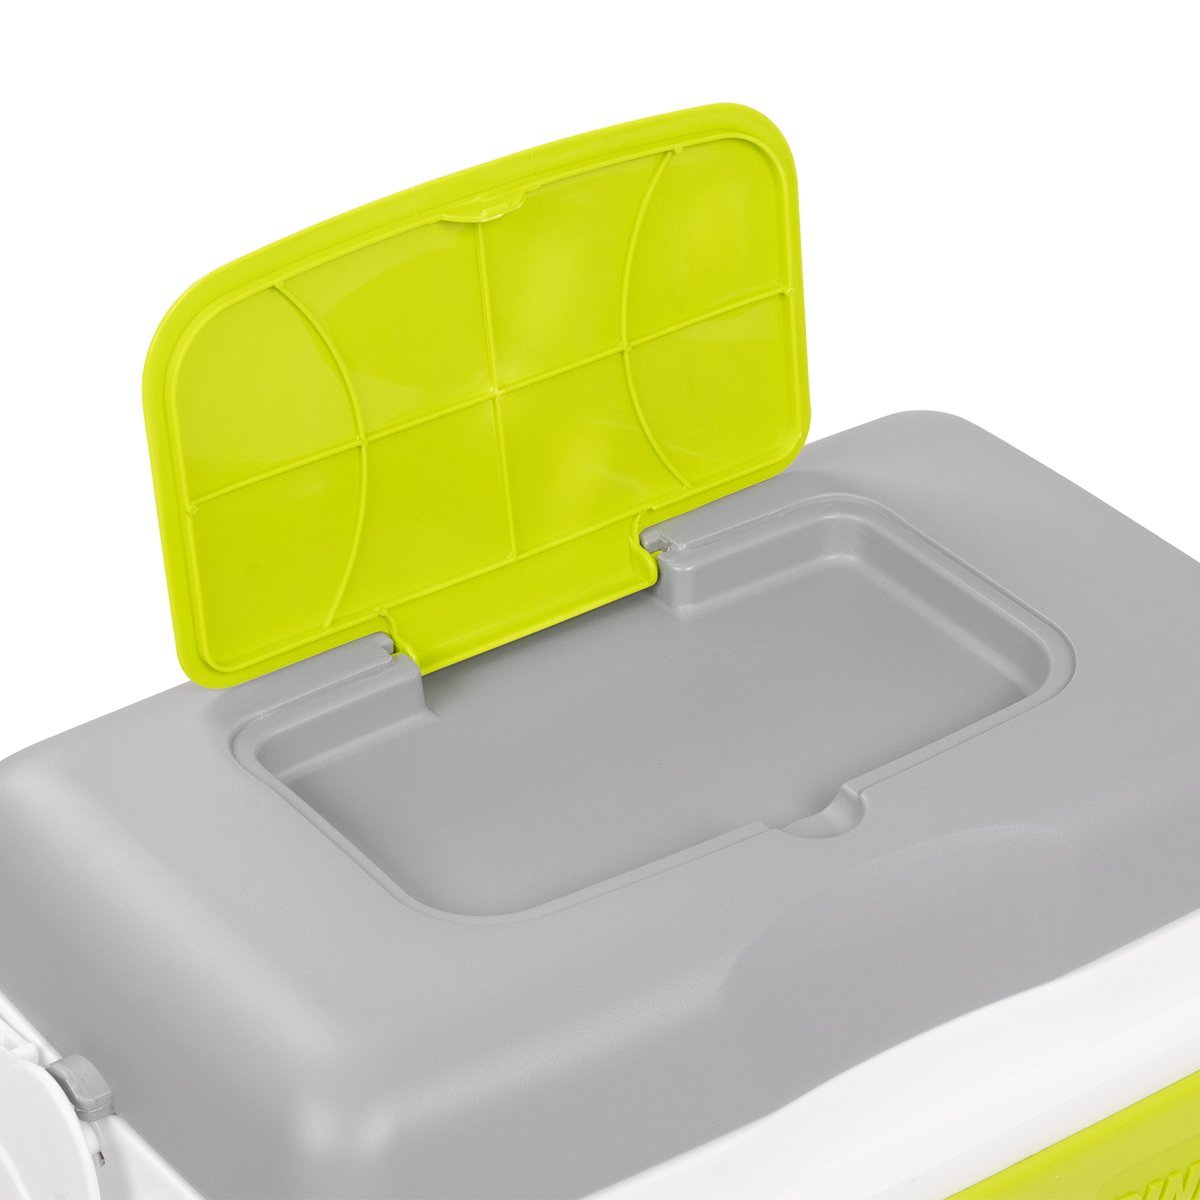 Primero Portable Camping Ice Chest with Lid Cup Holders, 33 qt with an extra storage space in the lid